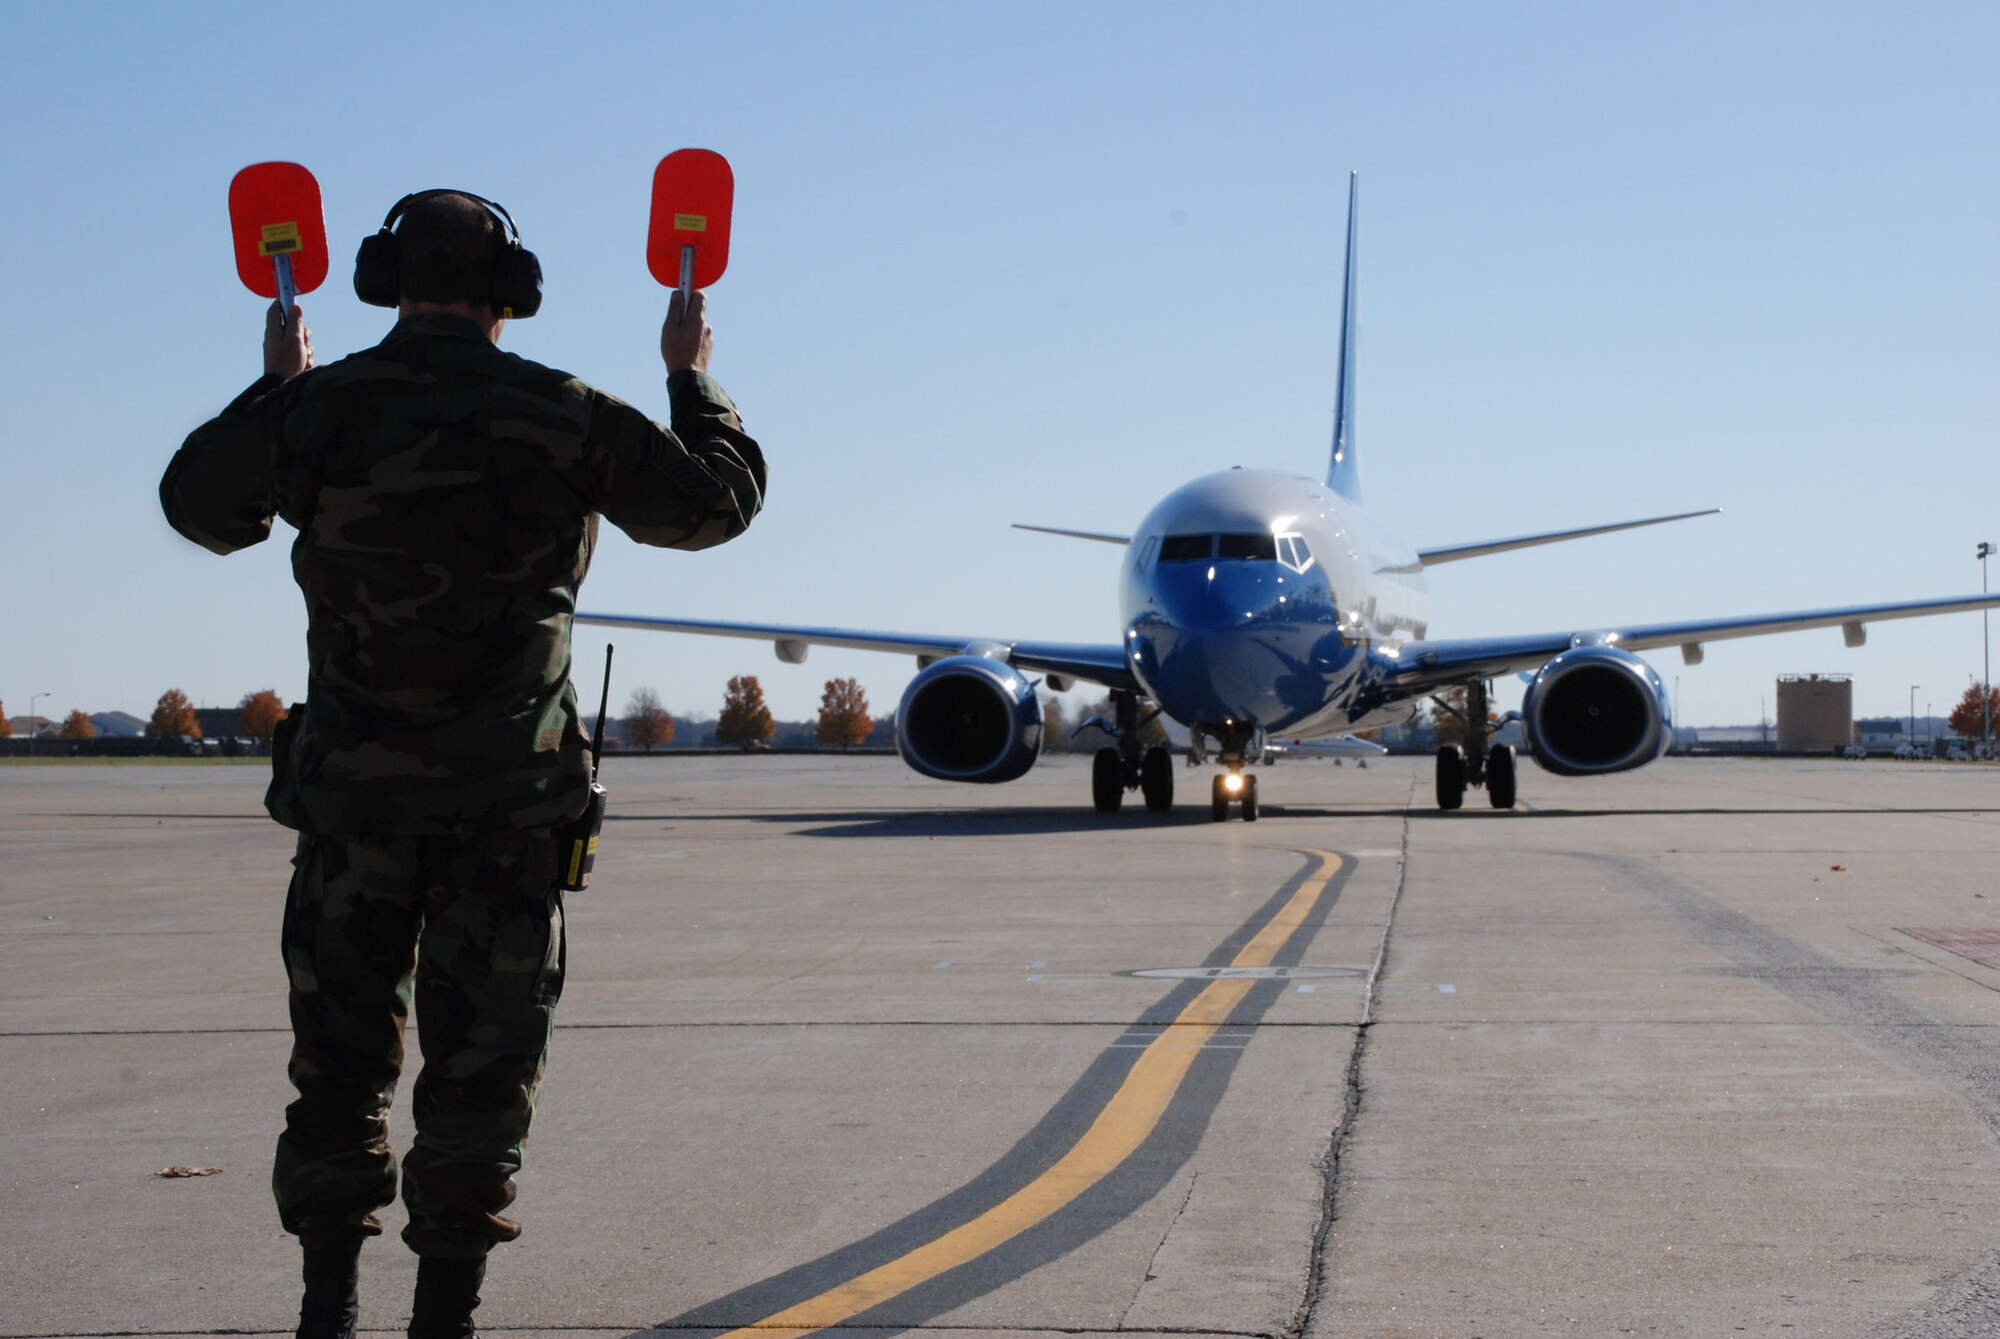 Senior Master Sgt. Bill Treakle of the maintenance squadron, 932nd Airlift Wing, directs the third C-40C to its parking spot right after it landed with Maj. Gen. Robert Duignan at the controls.  The Fourth Air Force commander flew the new plane from the factory to the Illinois Air Force Reserve unit on November 16, 2007.  Photo/Capt. Stan Paregien